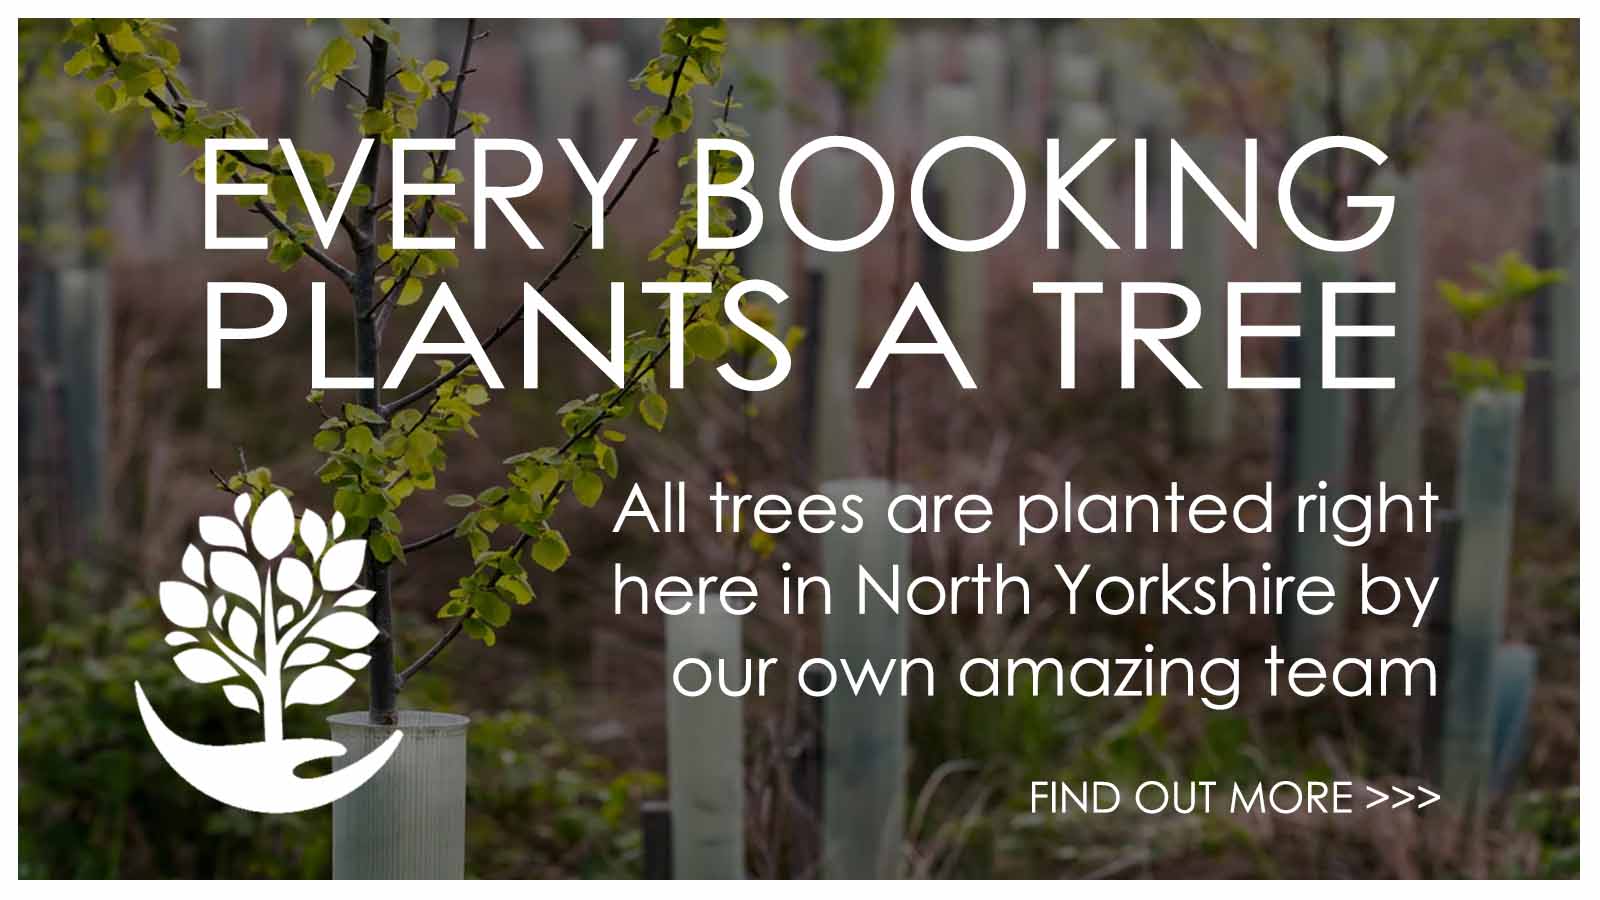 Every Booking Plants a Tree